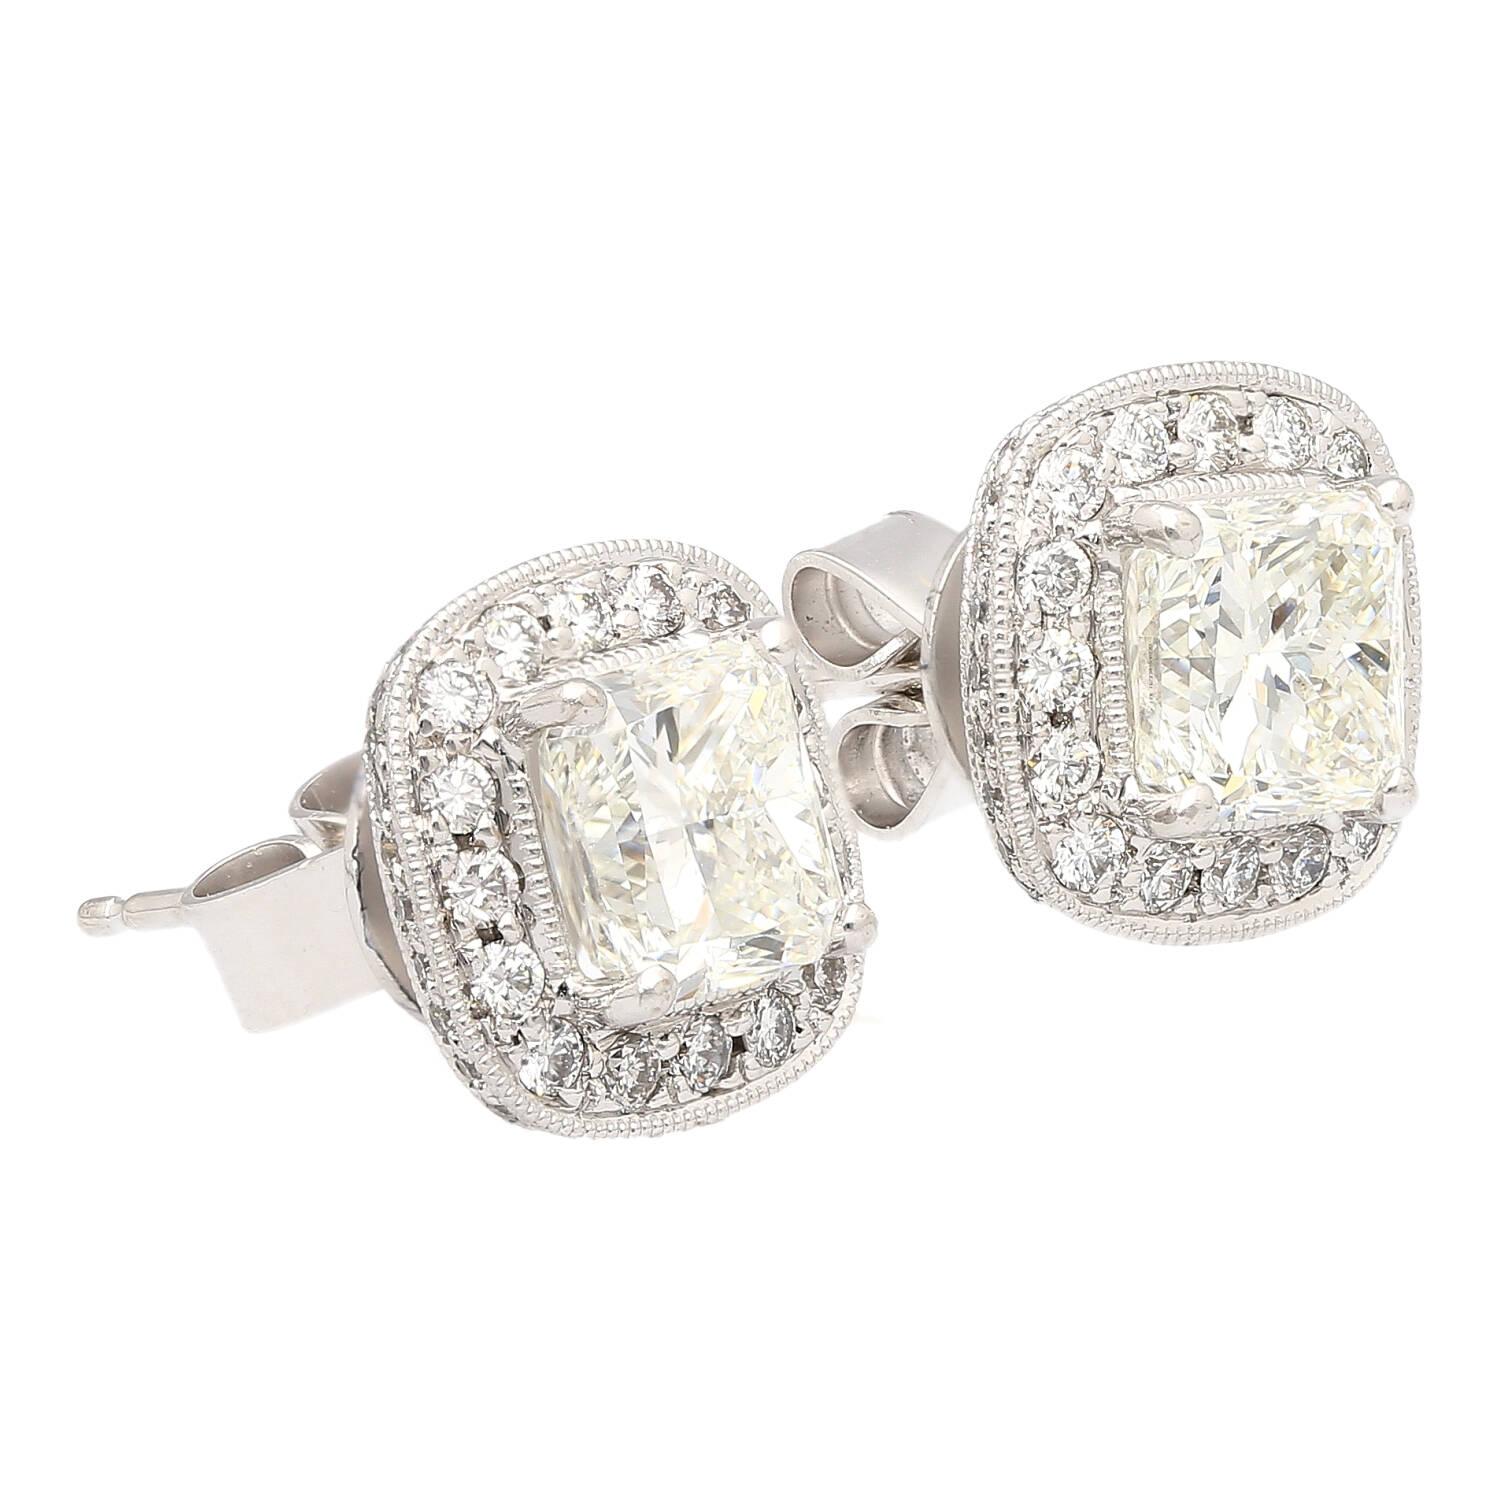 3 carat total radiant cut natural diamond stud earrings. Set in 18k white gold with a round-cut diamond halo and push-back closure. Featuring a 1.50 carat GIA certified and EGL certified 1.51 carat radiant cut diamond. Both VS1 clarity and H